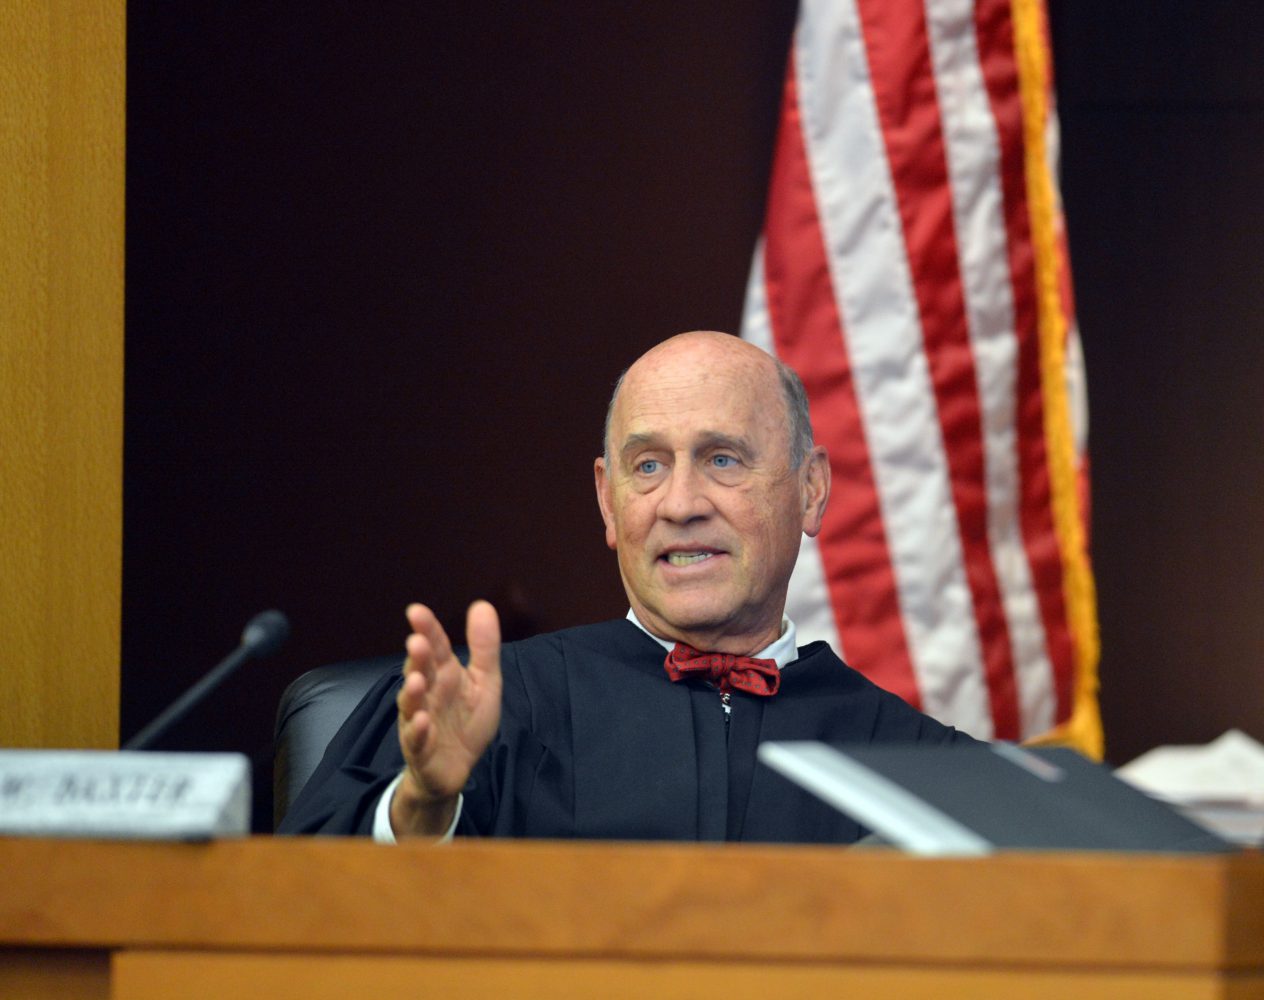 I’LL BE THE JUDGE OF THAT:  Grady graduate Jerry Baxter presides over the trial of Tamara Cotman in August as part of the APS trial.
Photo Courtesy of Kent D. Johnson/ Atlanta Journal Constitution 